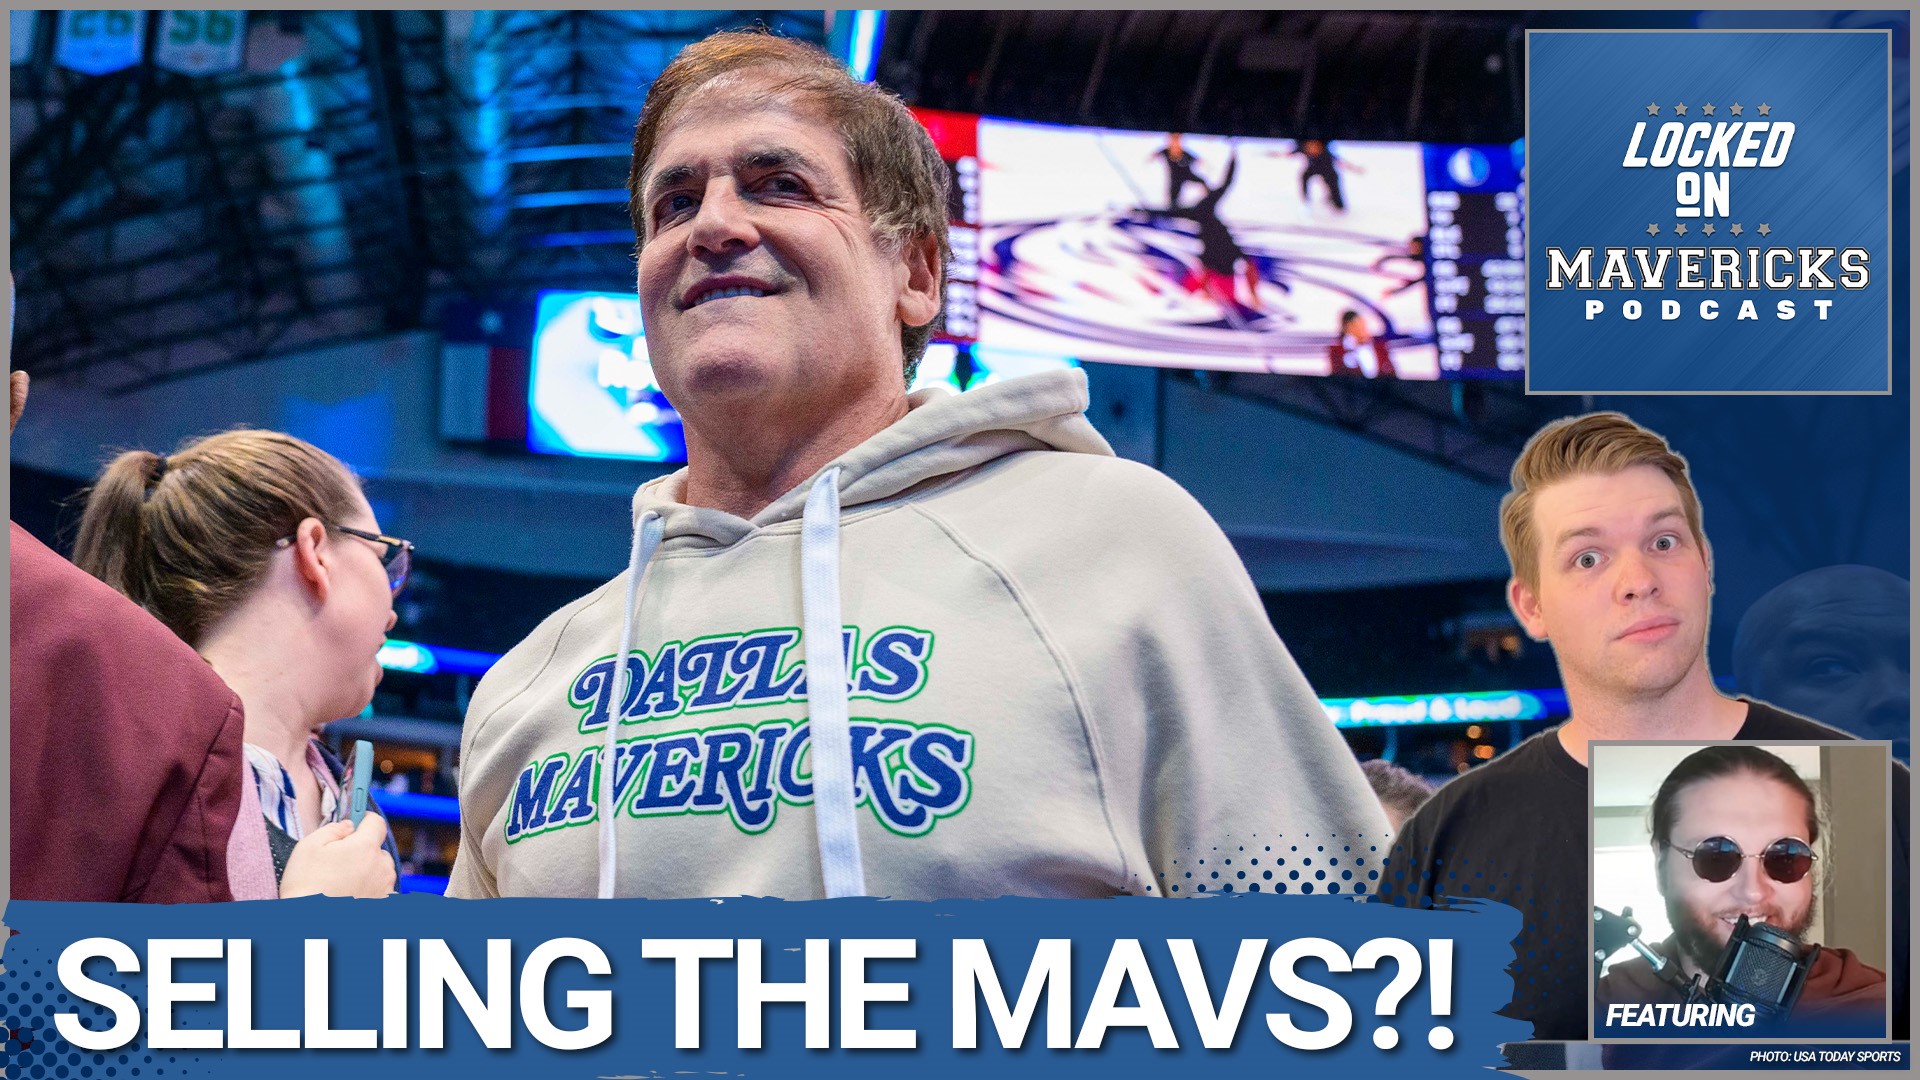 Nick Angstadt & Slightly Biased react to the news, explain why it's happening, and speculate on what will happen next for Mavs Fans.